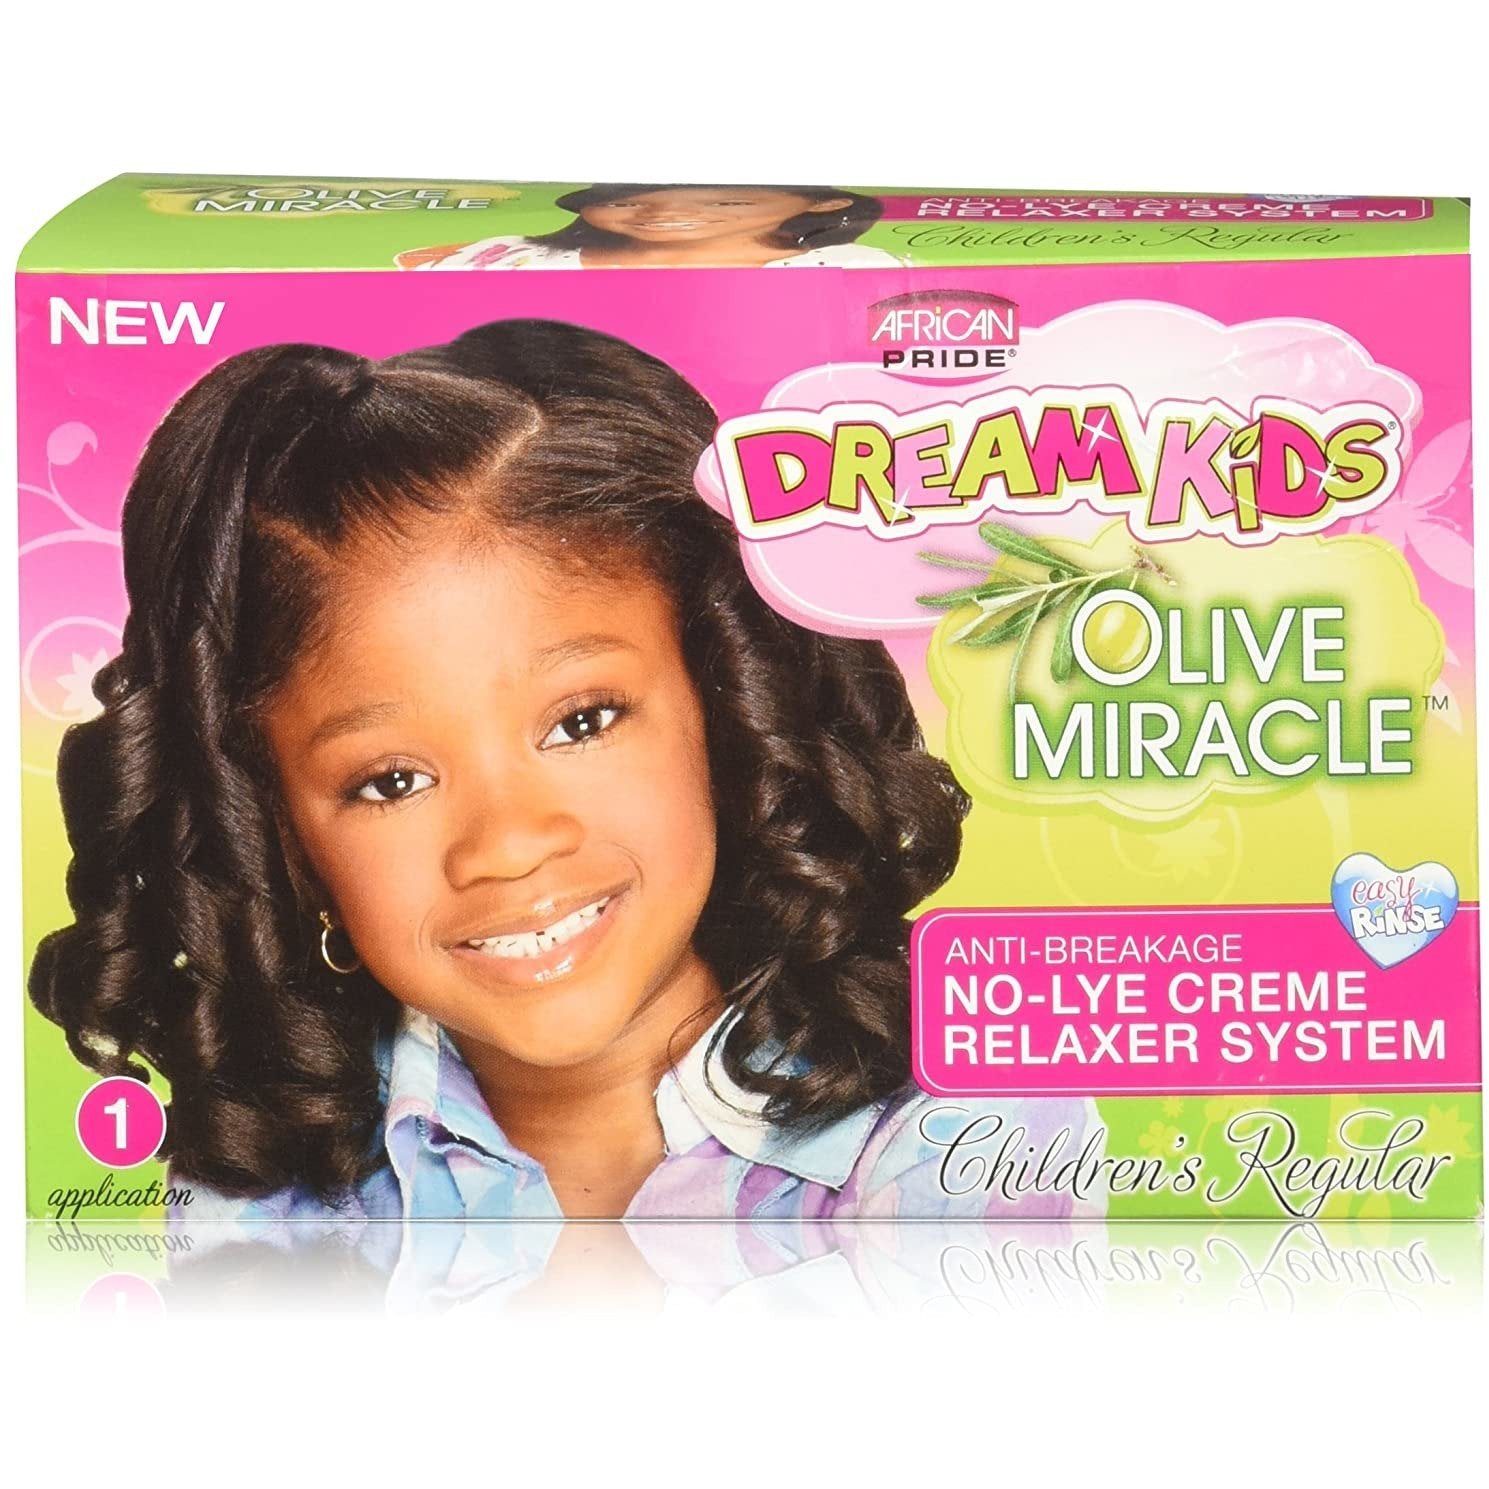 AP DREAM KIDS OLIVE MIRACLE NO-LYE RELAXER SYSTEM REGULAR-African Pride- Hive Beauty Supply